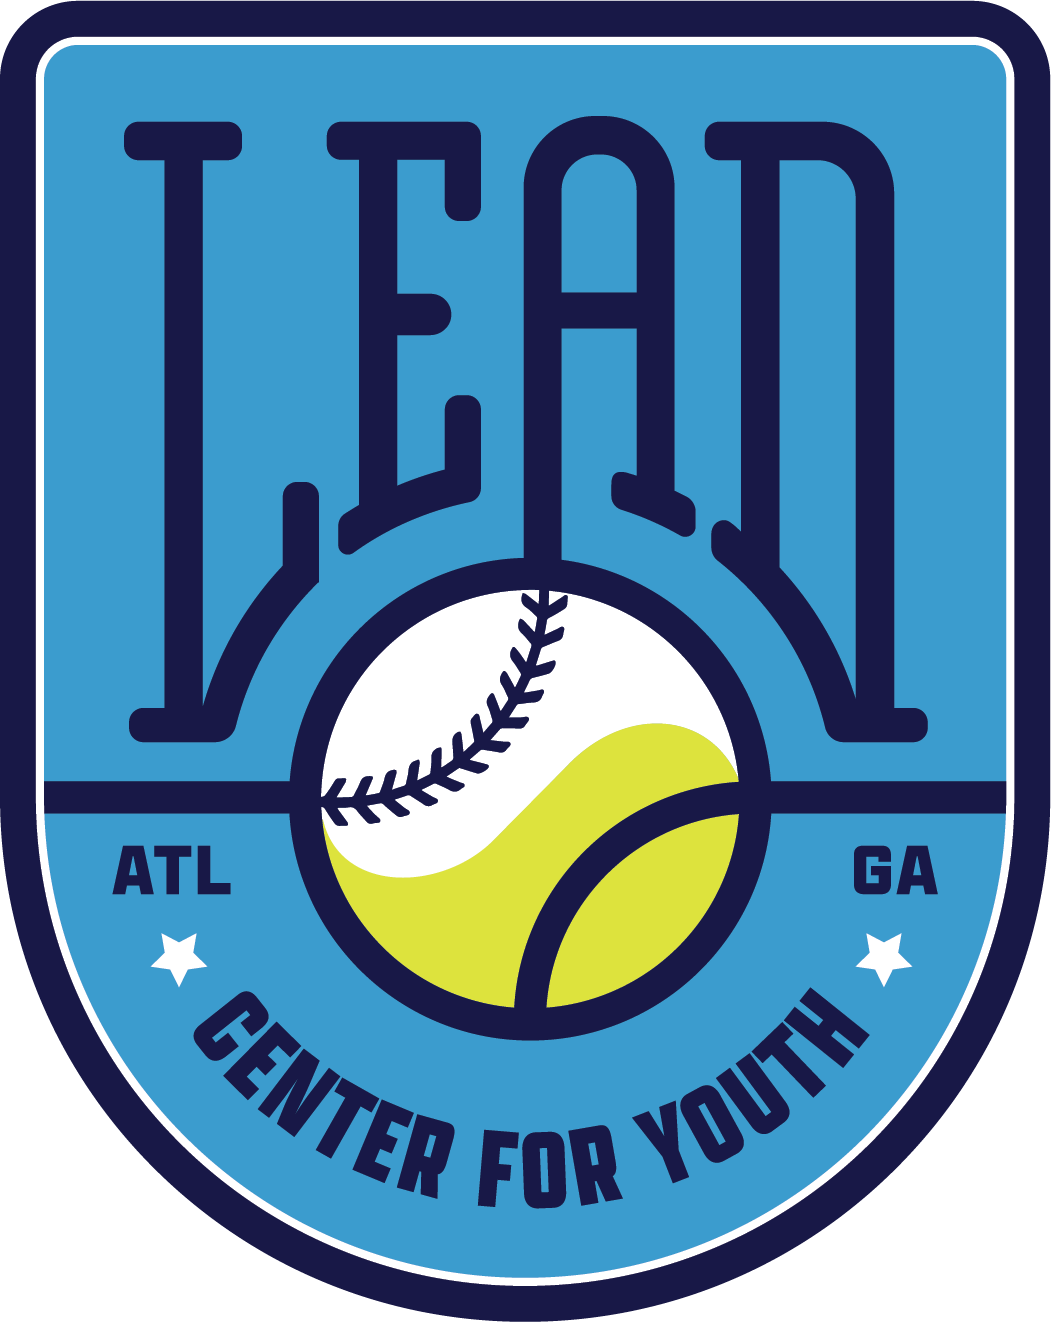 L.E.A.D. Center for Youth logo